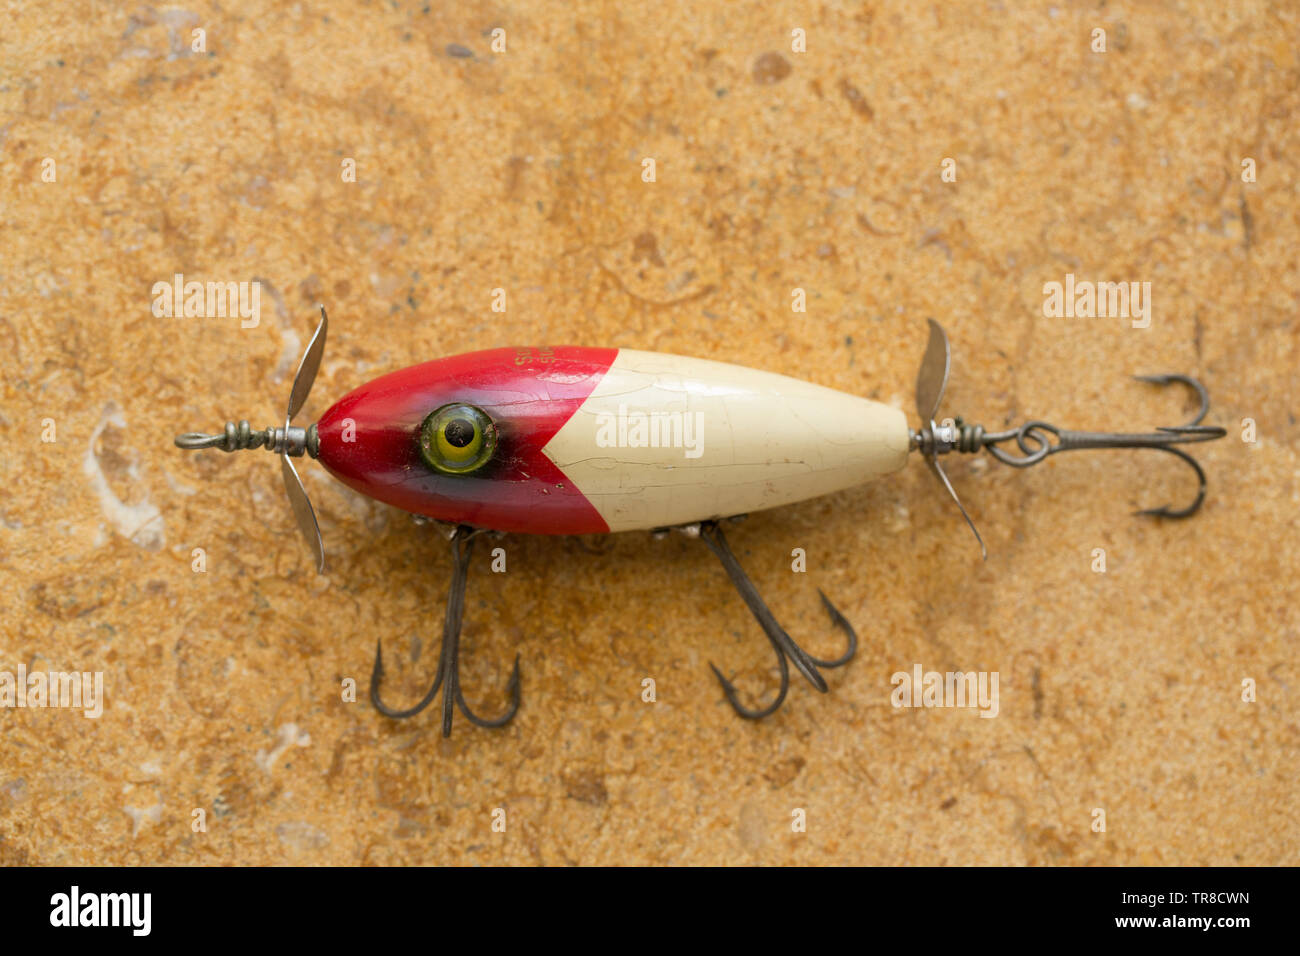 An old South Bend fishing lure photographed on a stone background. Lures such as these are often called plugs this one being equipped with three large Stock Photo